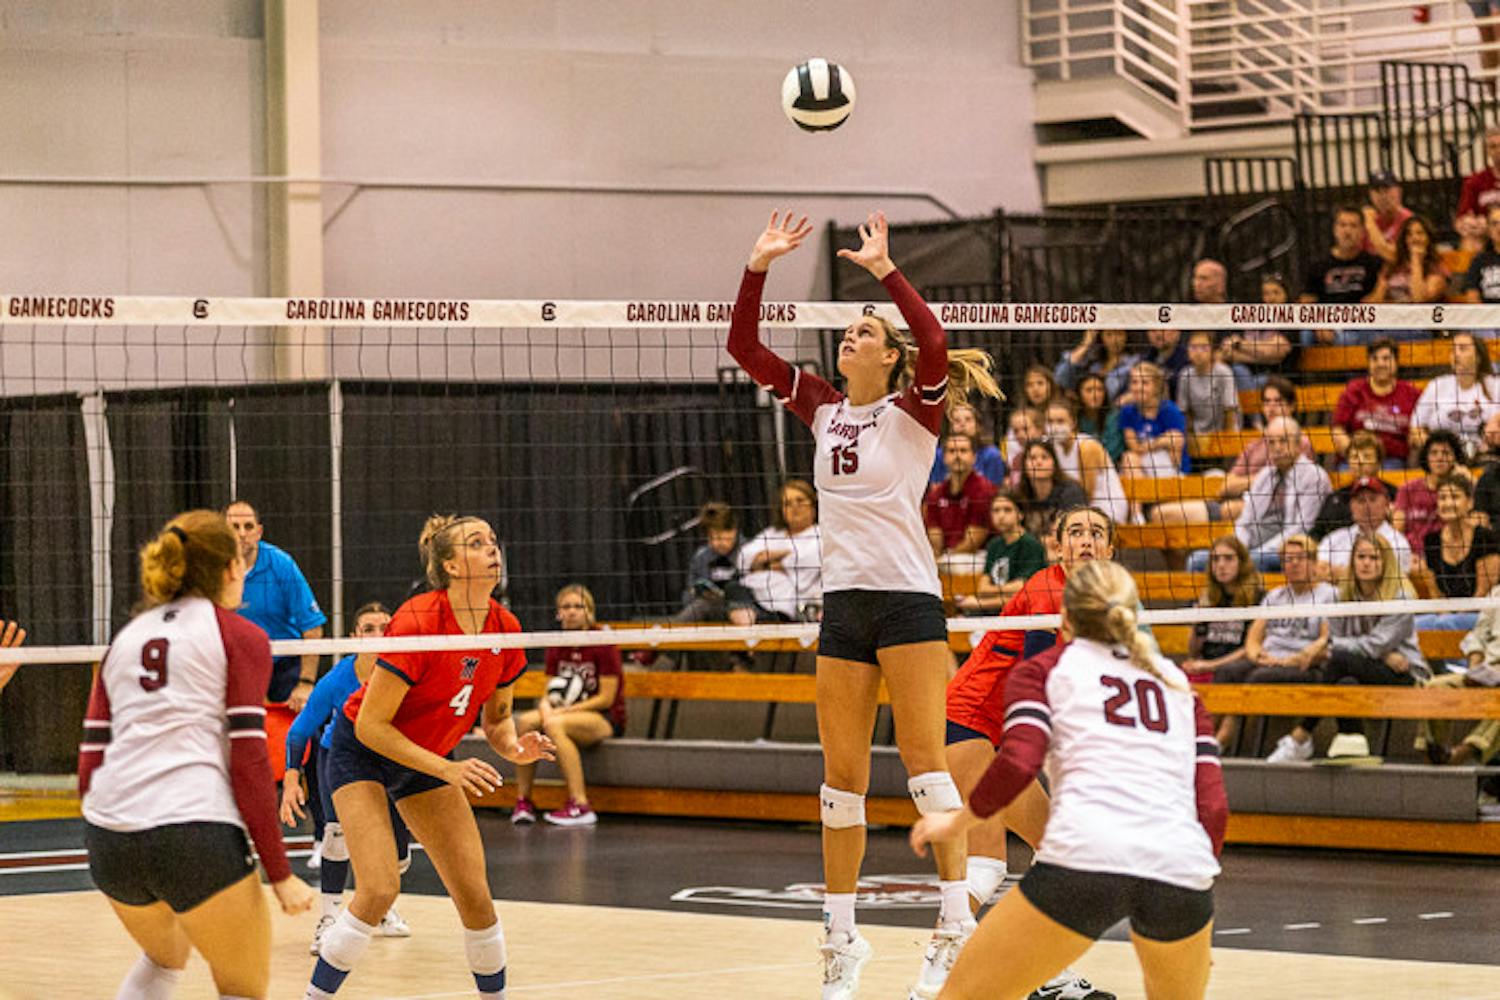 Sophomore setter Claire Wilson sets the ball during the match between South Carolina and Ole Miss on Nov. 5, 2022. The Rebels beat the Gamecocks 3-1.&nbsp;